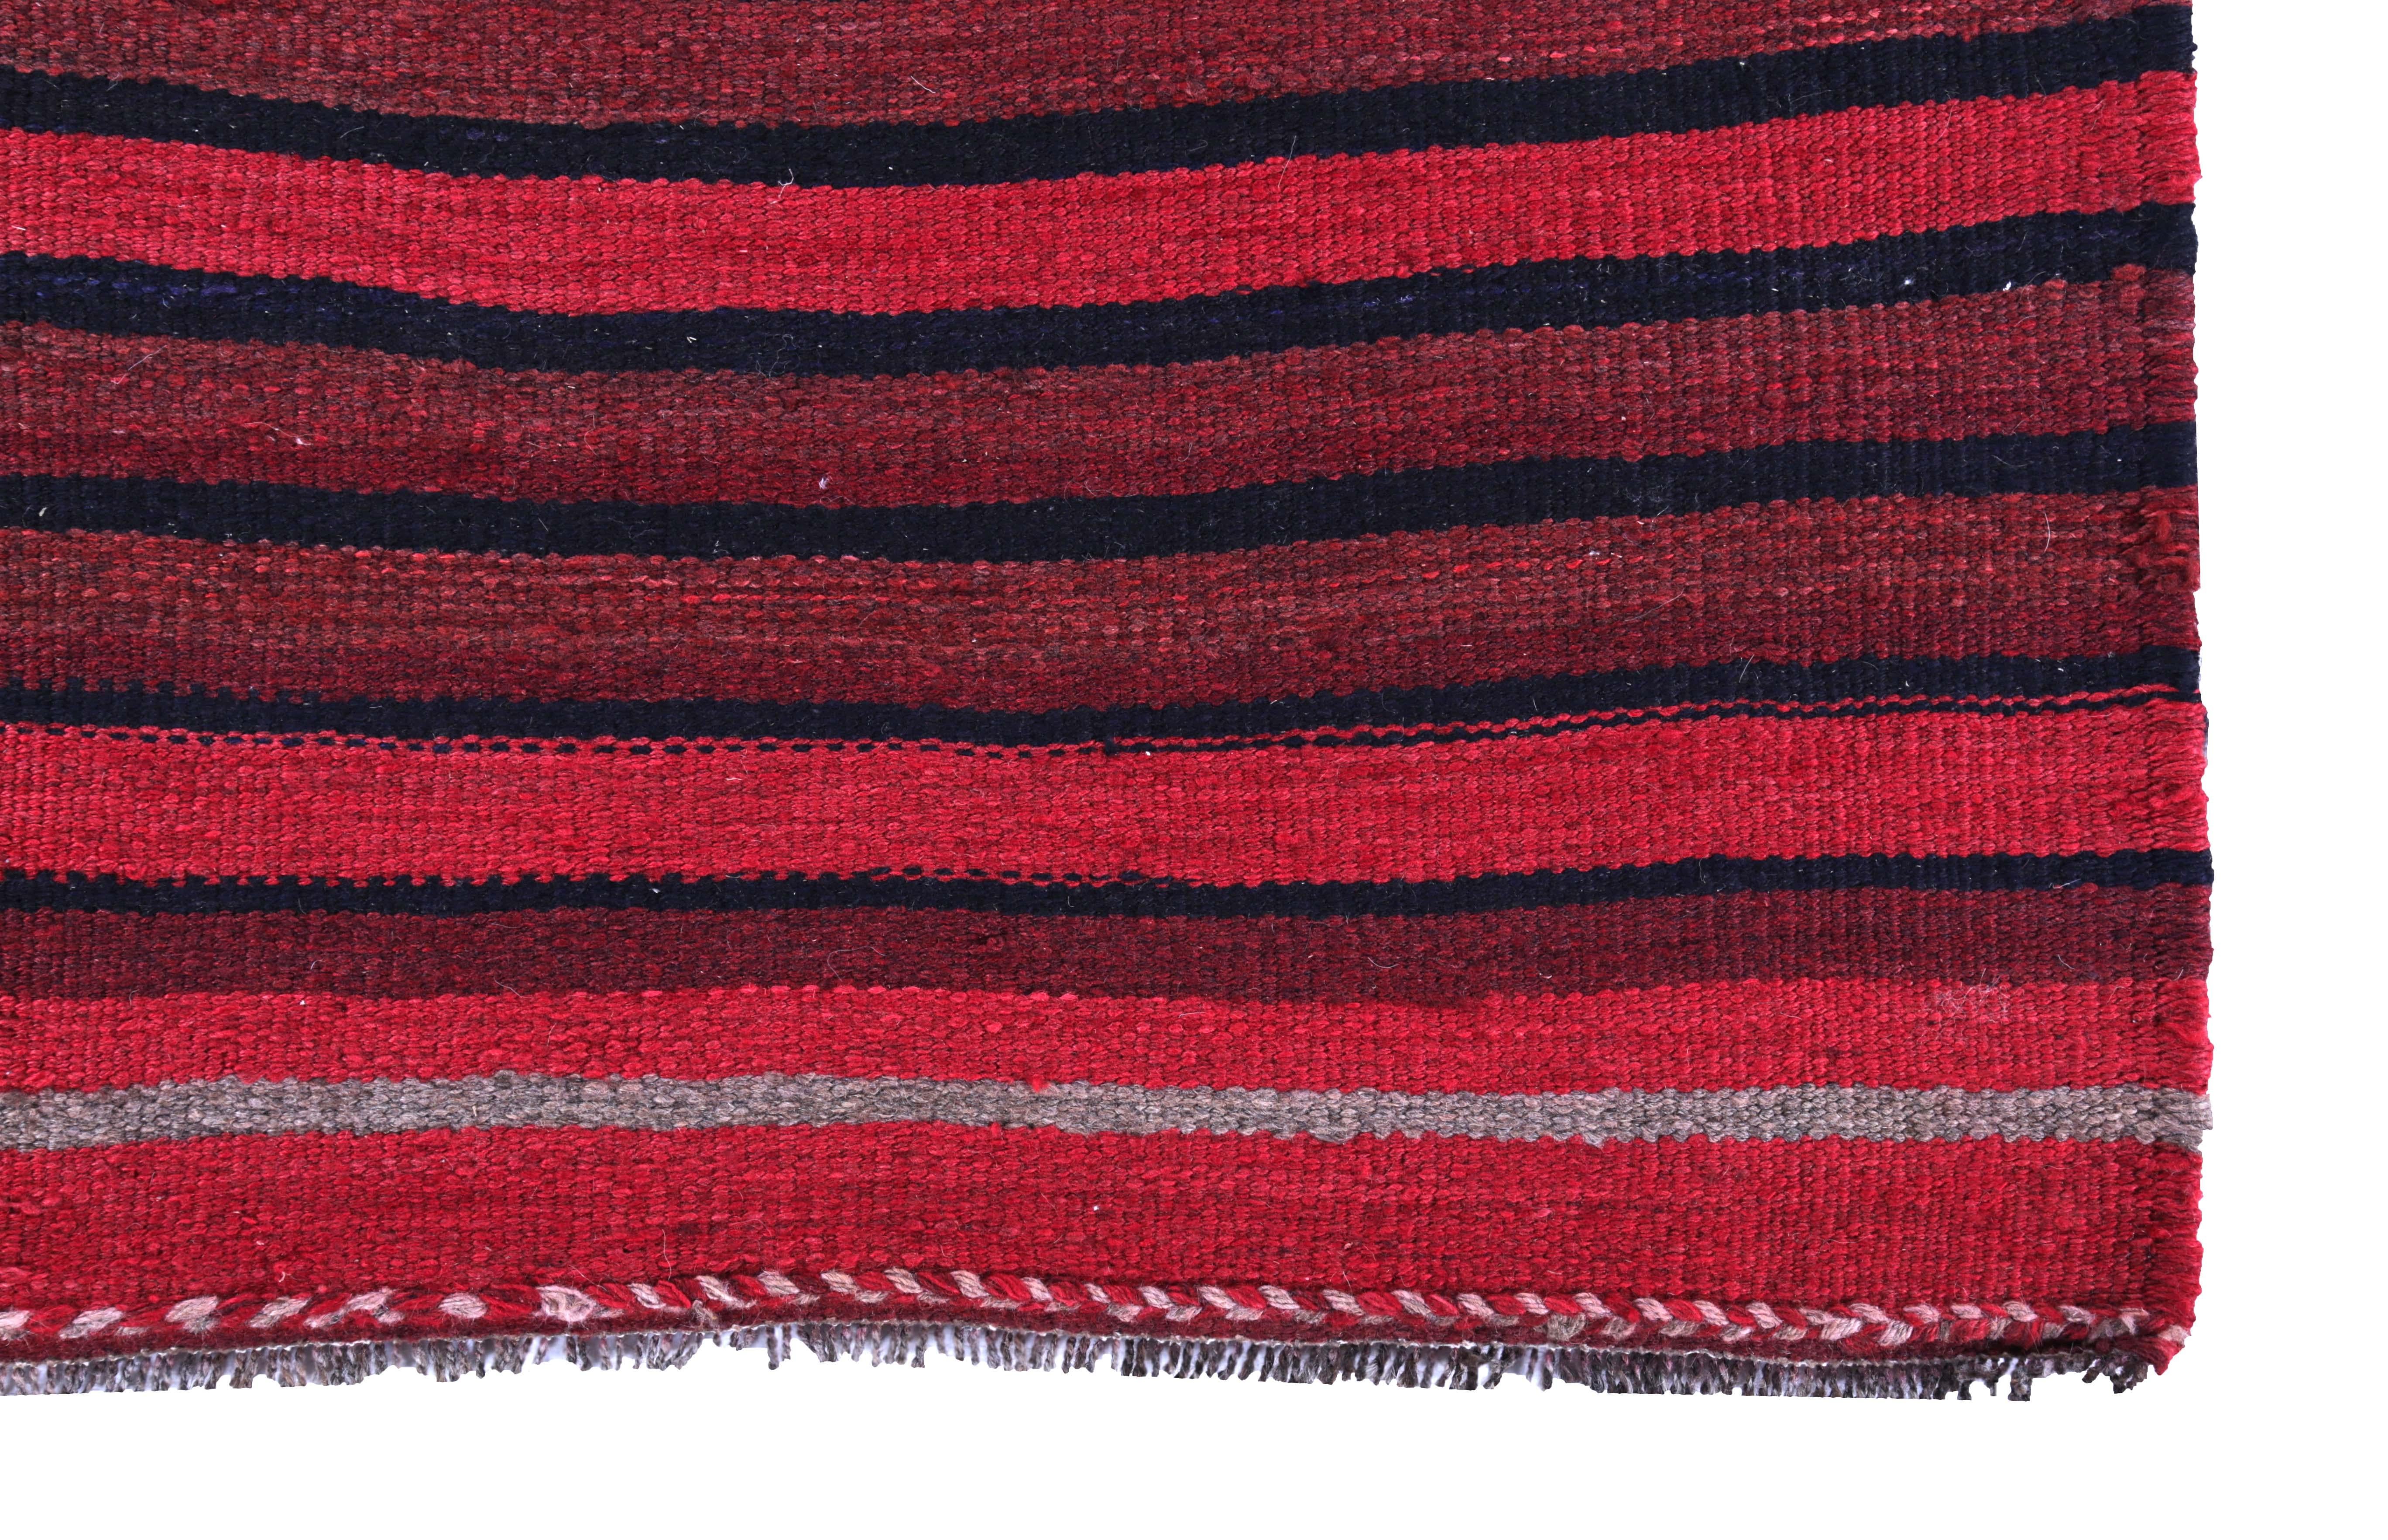 Hand-Woven Turkish Kilim Runner Rug with Pink, Navy and Red Stripes For Sale